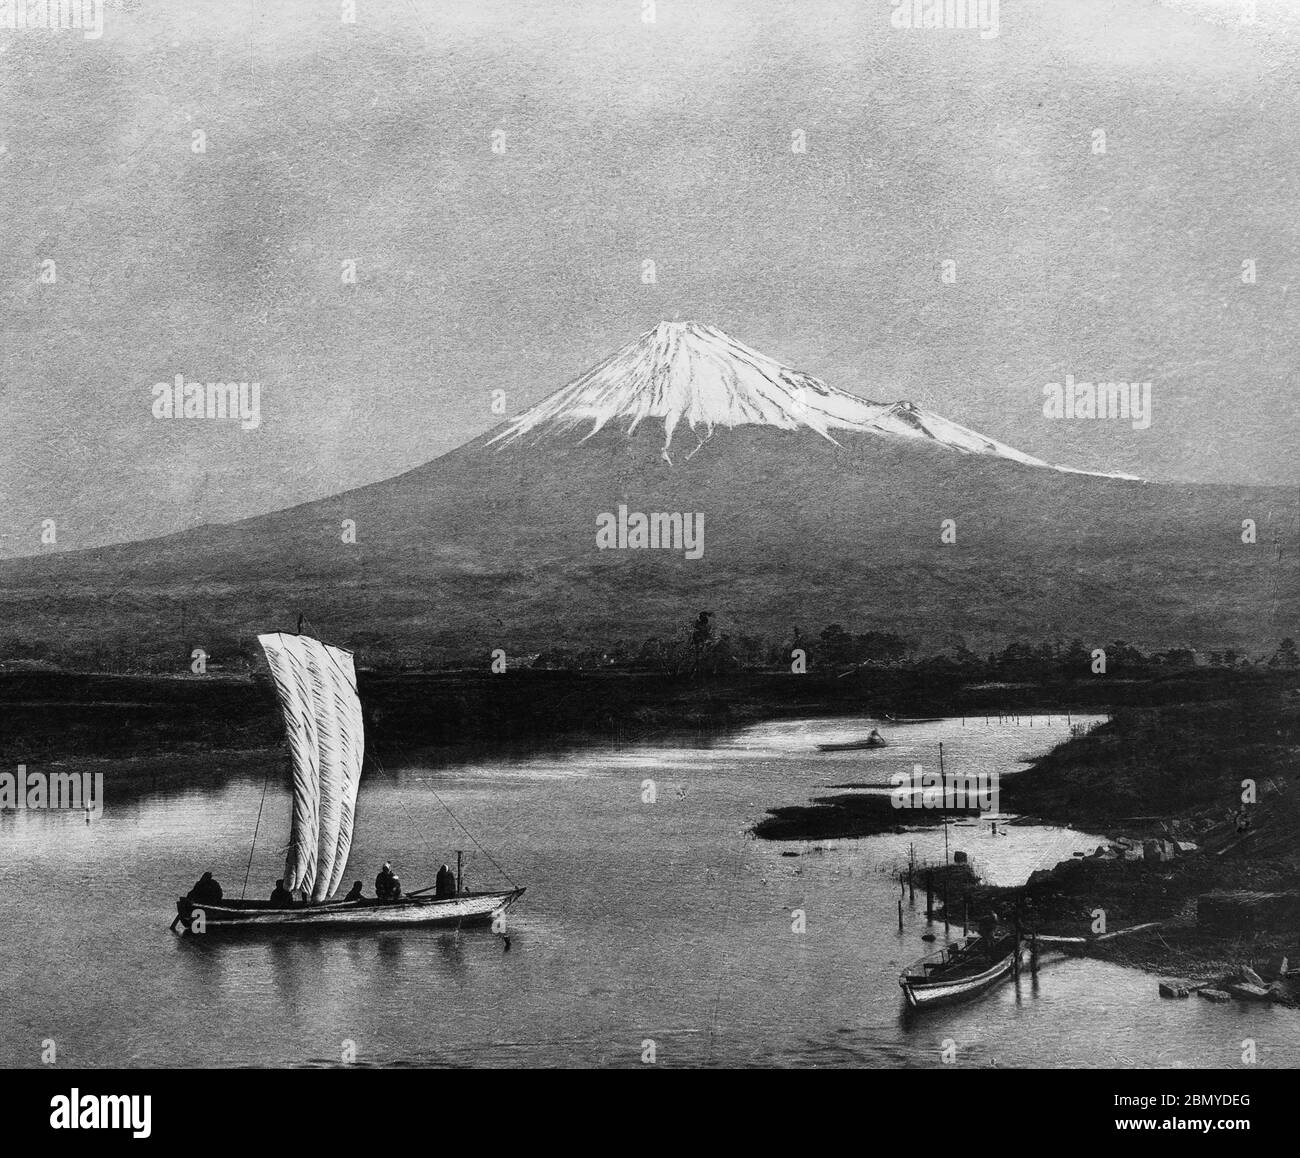 [ 1890s Japan - Mount Fuji ] —   Mount Fuji as seen from the Numakawa River (沼川) in Shizuoka Prefecture. A small sailing vessel can be seen.   From a series of glass slides published (but not photographed) by Scottish photographer George Washington Wilson (1823–1893). Wilson’s firm was one of the largest publishers of photographic prints in the world.  19th century vintage glass slide. Stock Photo